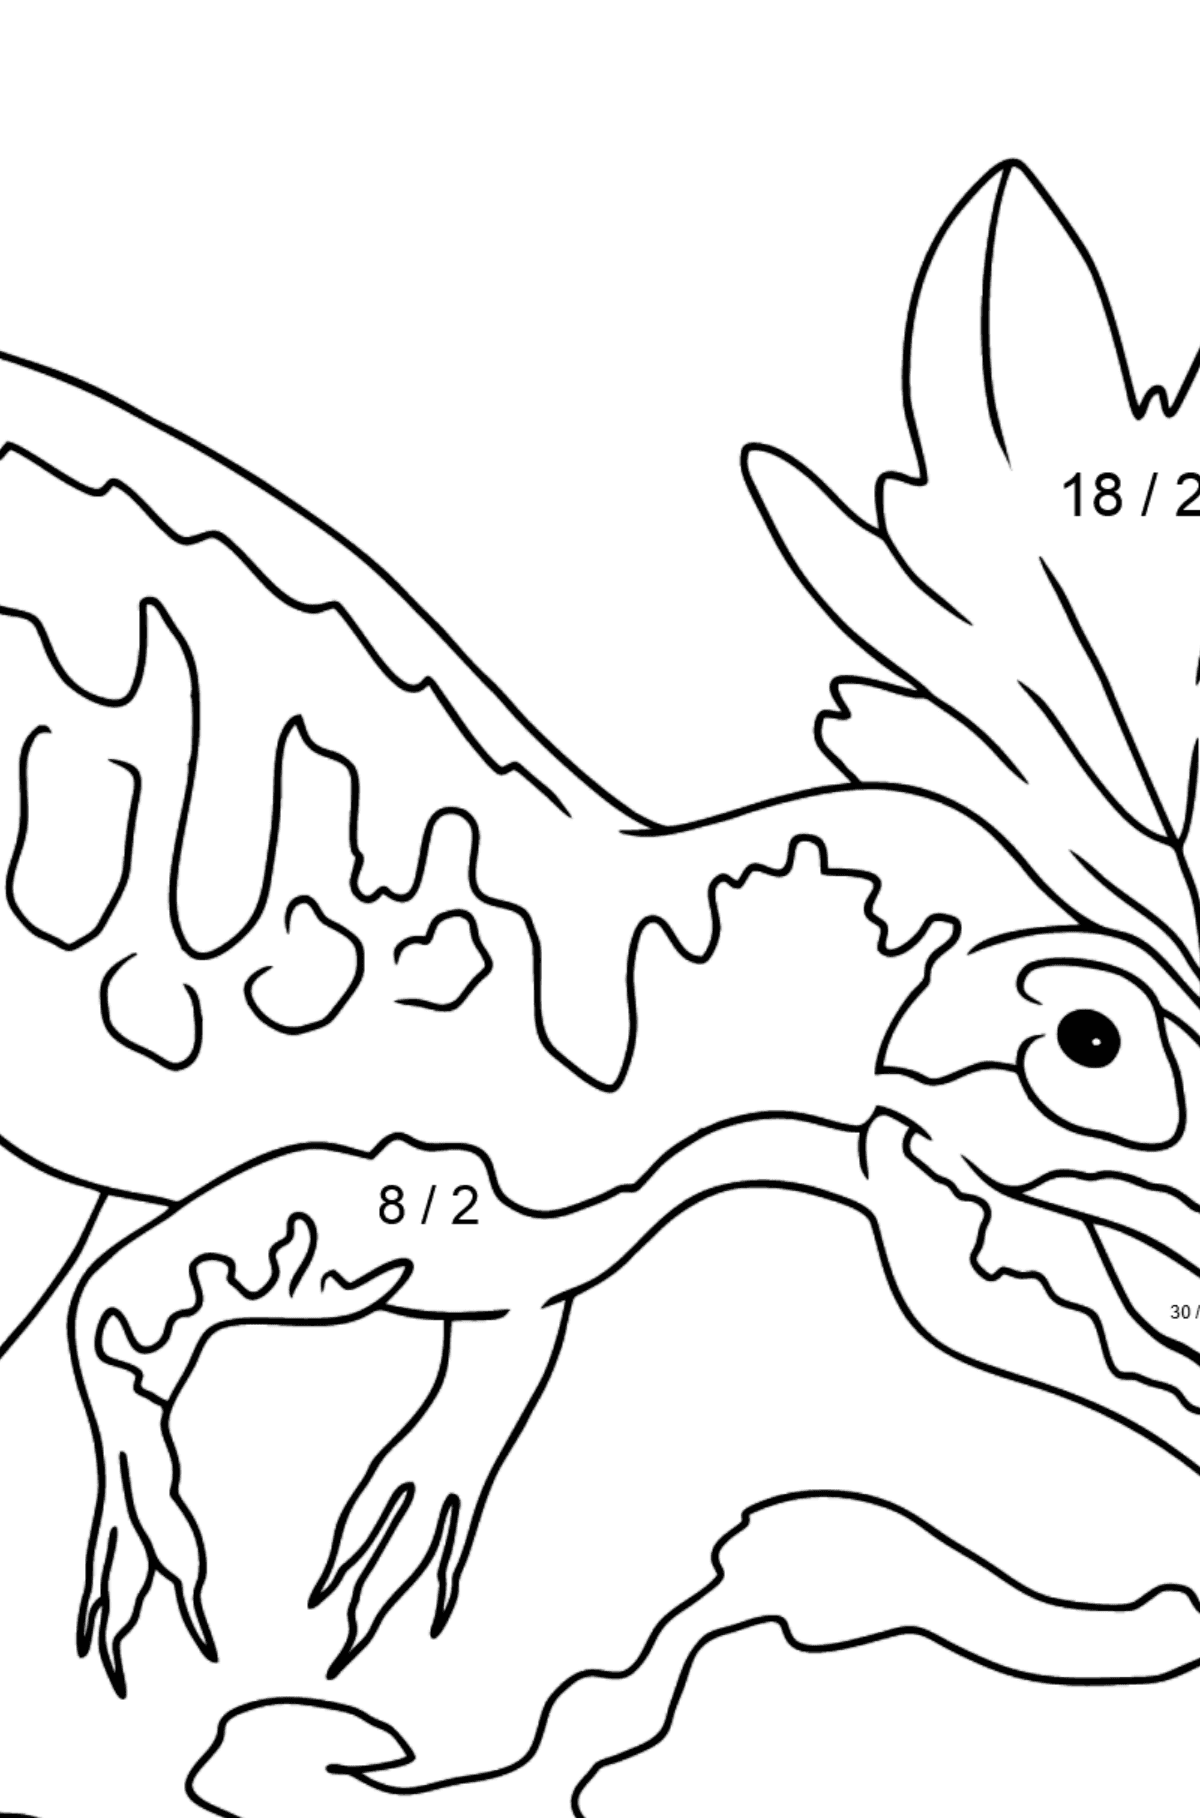 Allosaurus Coloring Page - Math Coloring - Division for Kids